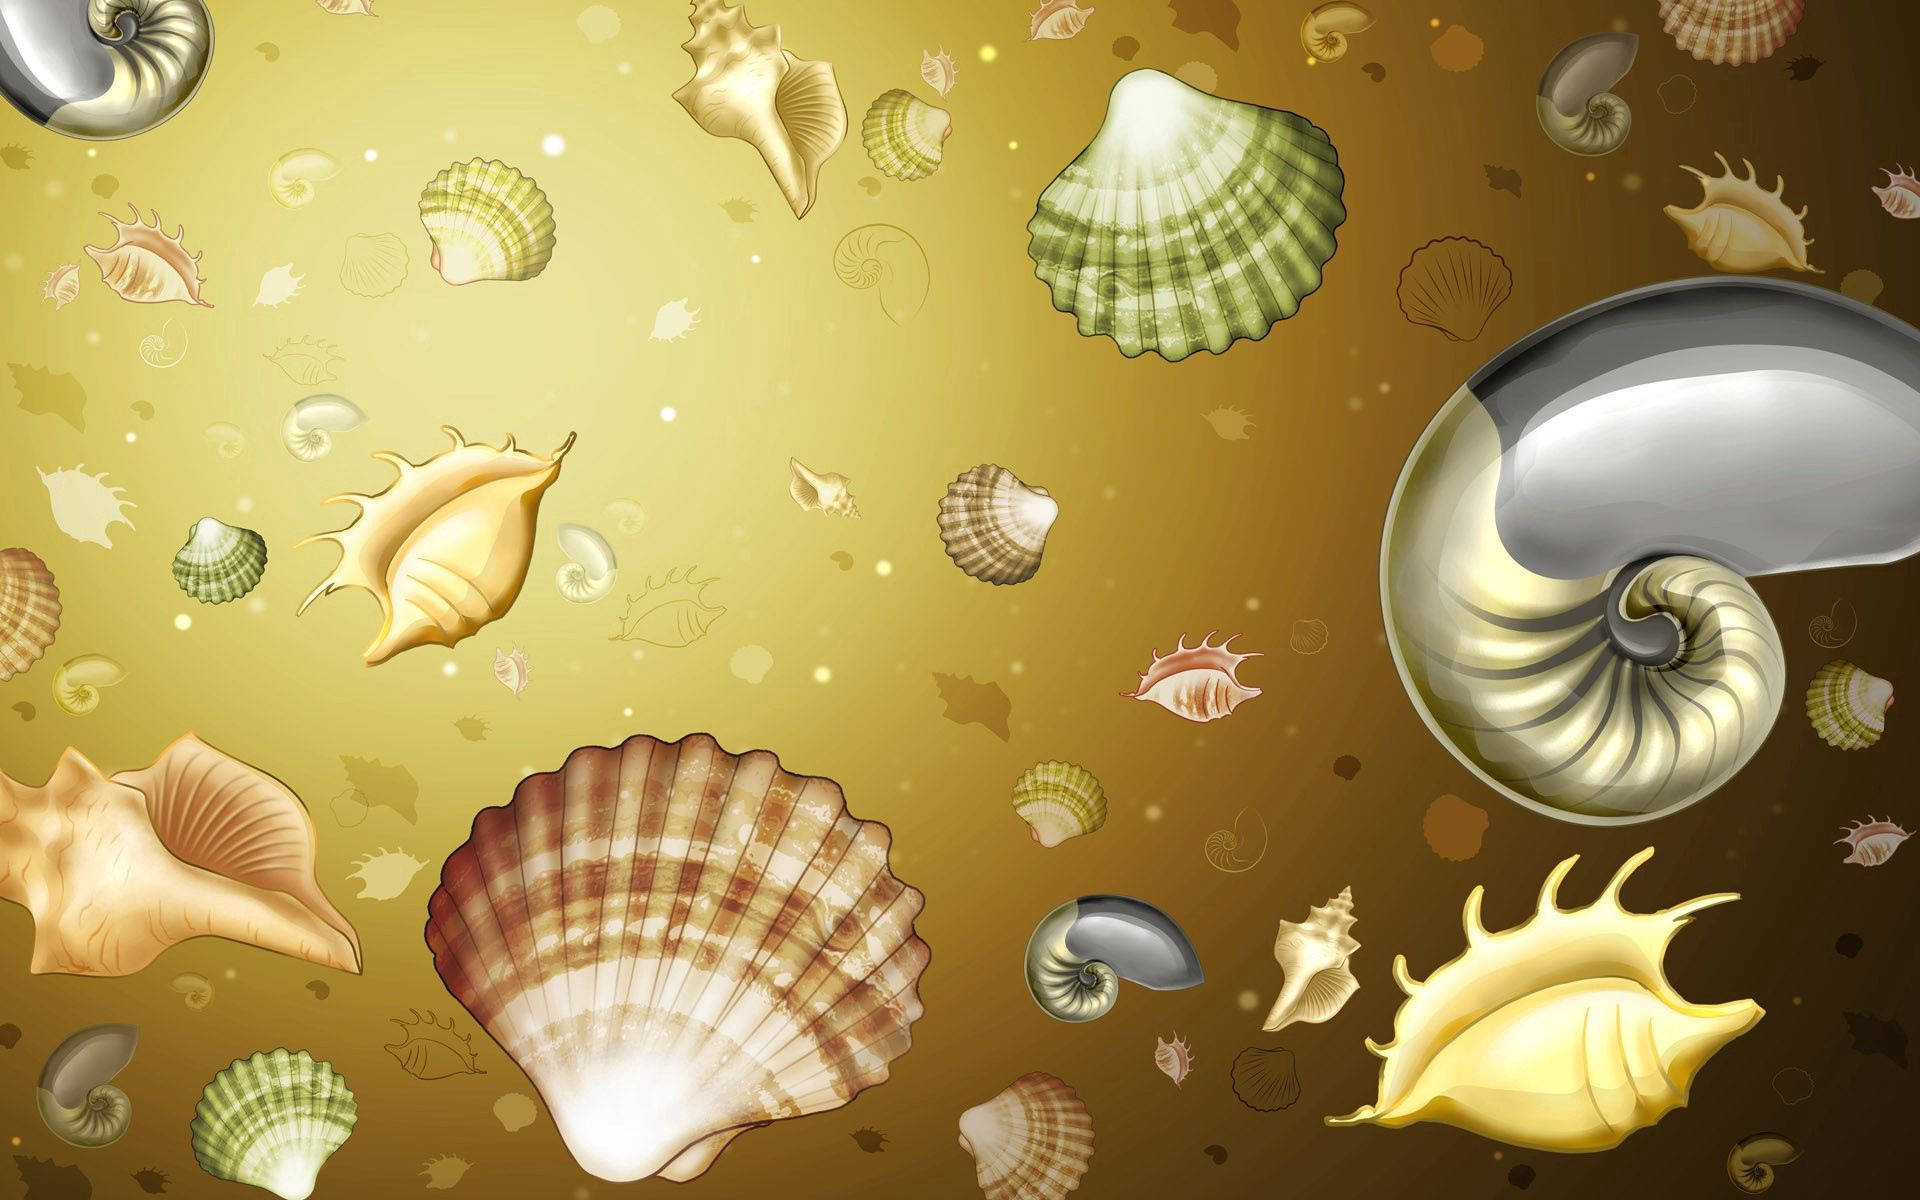 Get Lost in a Visual Odyssey of Animated Shells Wallpaper